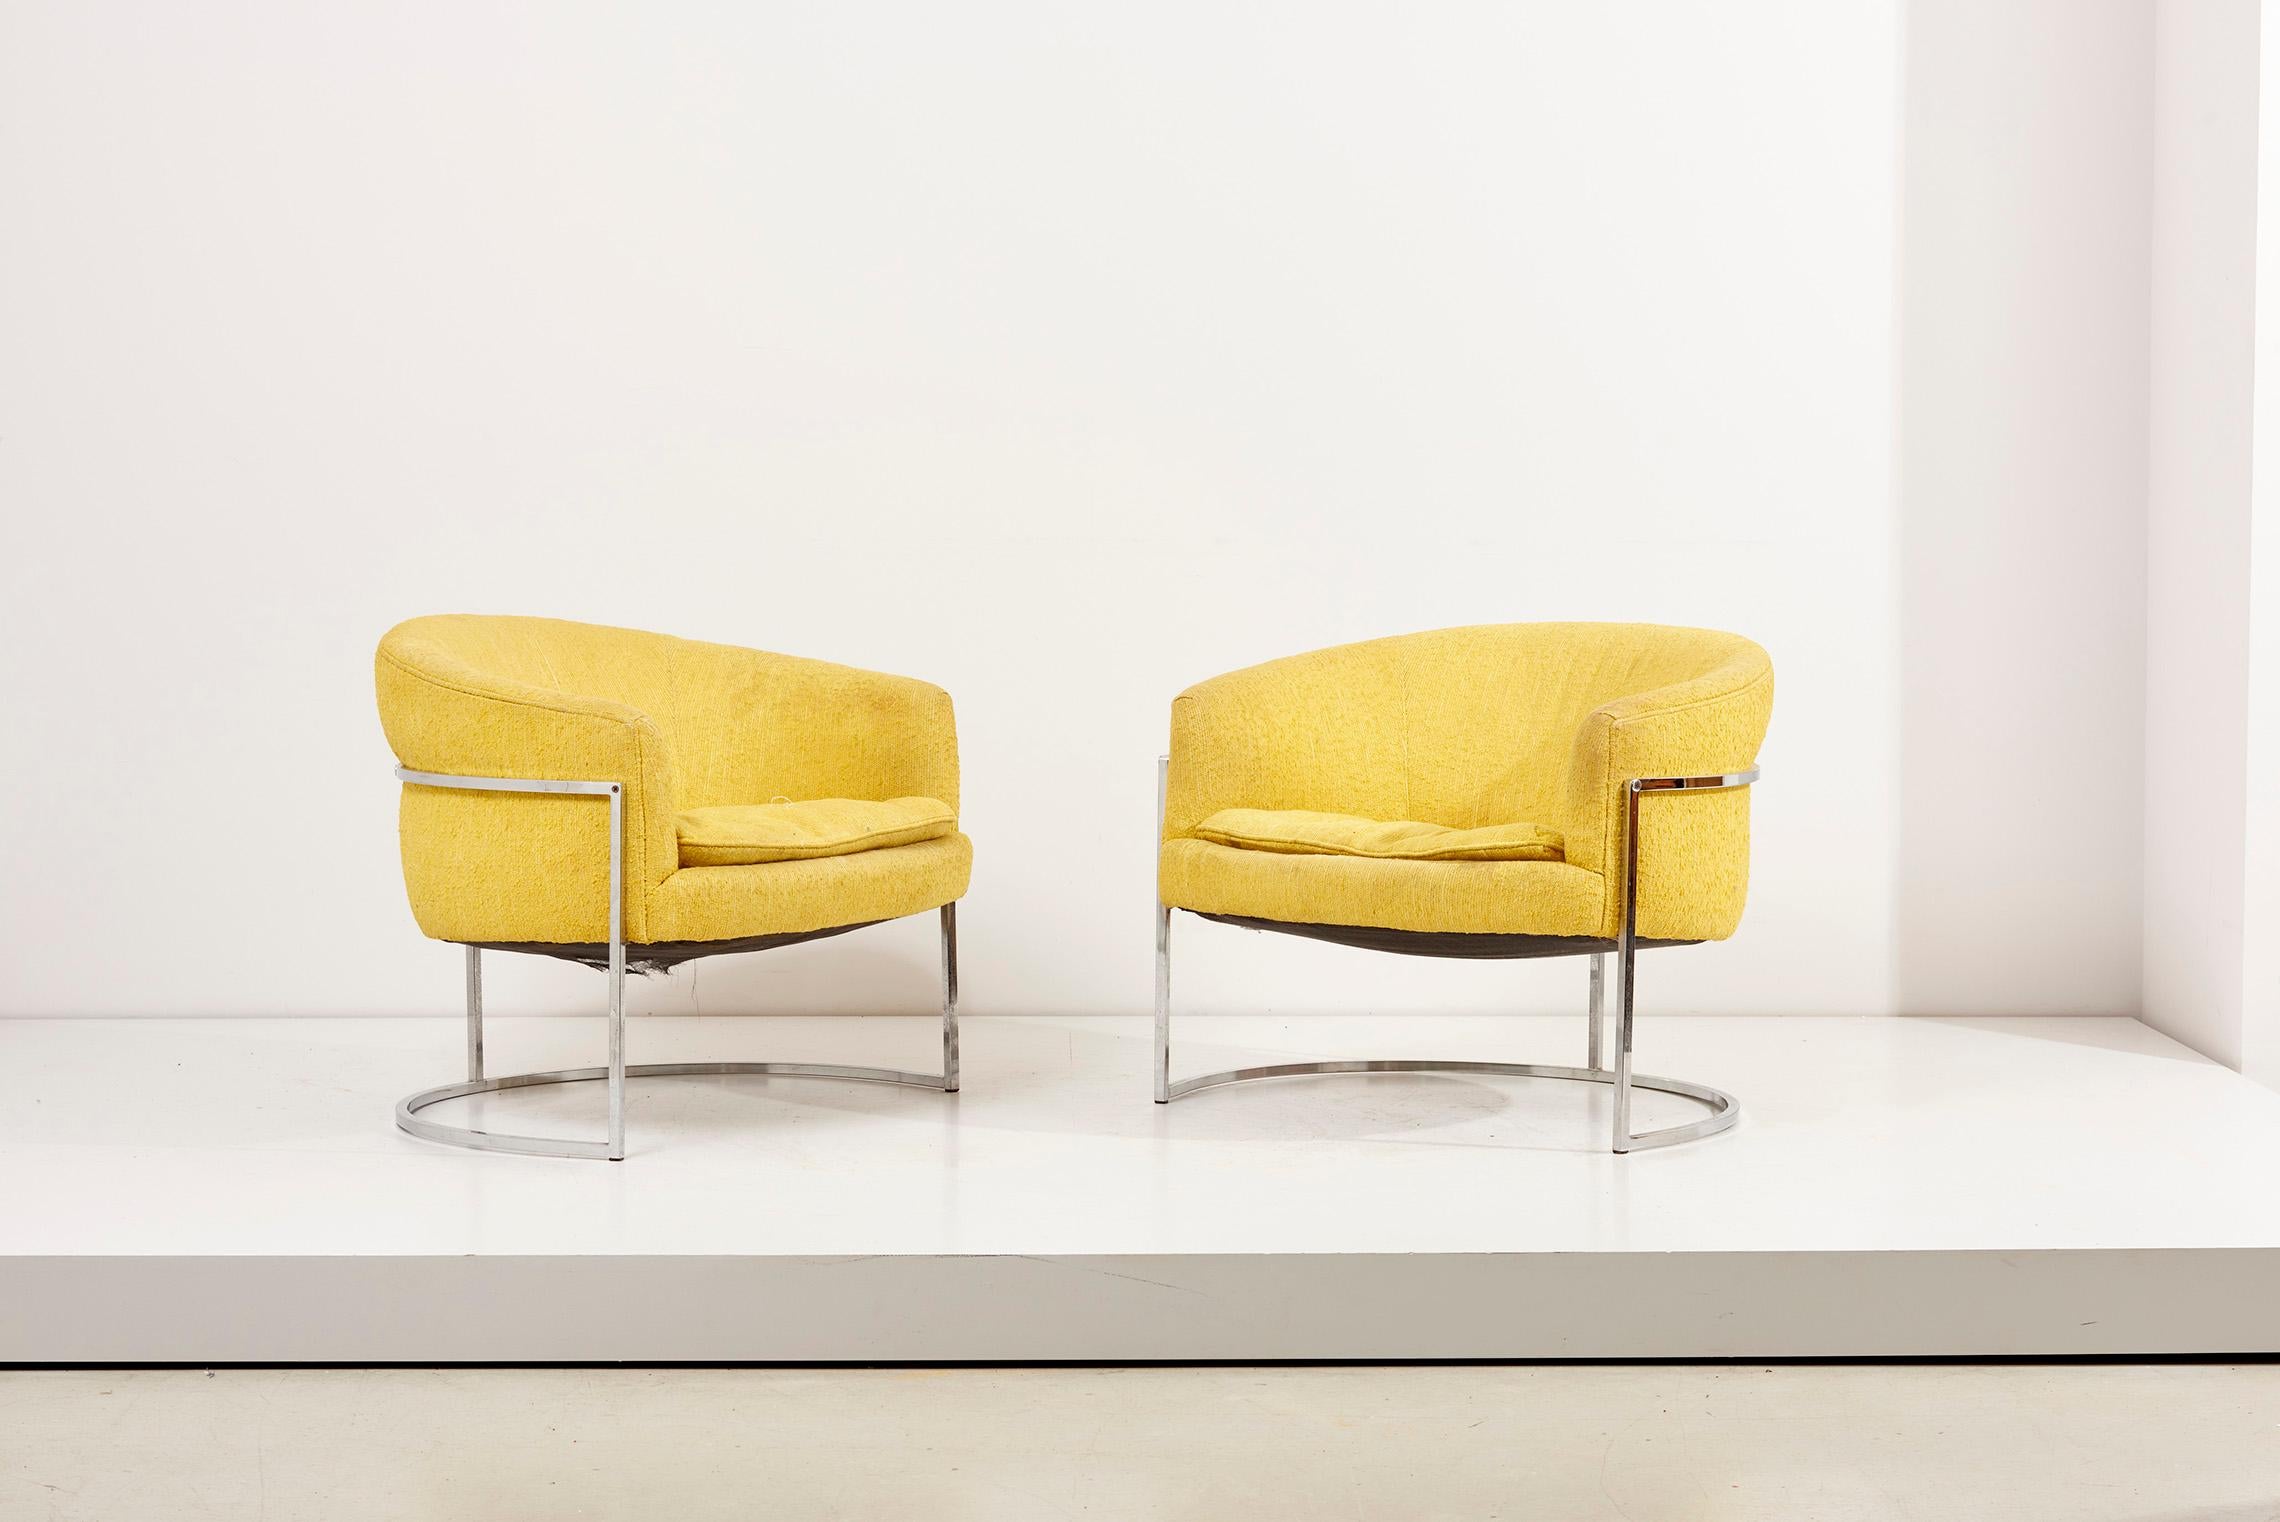 Pair of Bernhardt lounge chairs in chrome and yellow upholstery. 
The chairs have vintage upholstery. We are offering also reupholstery in our in house workshop.